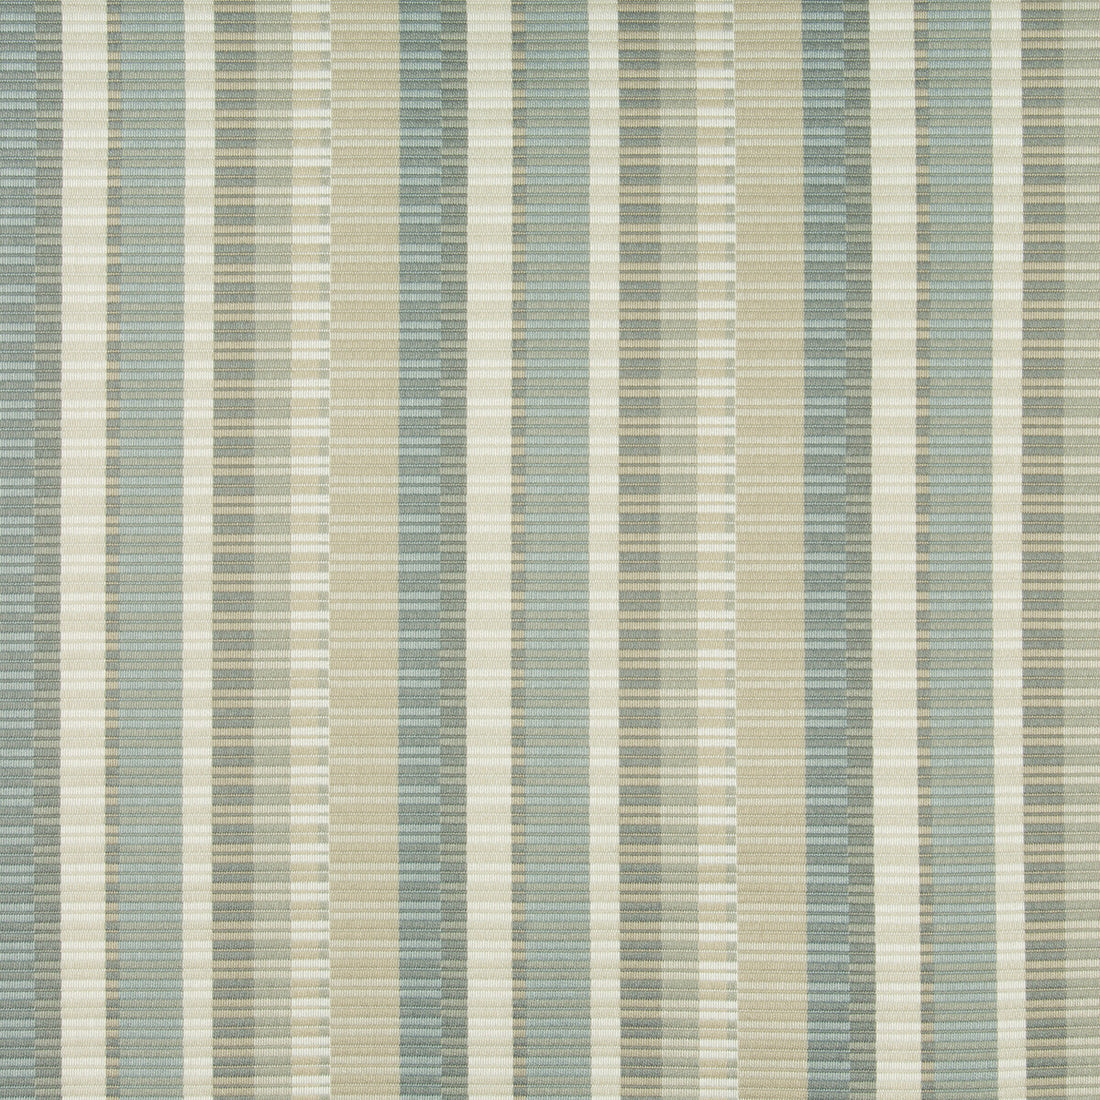 Kravet Contract fabric in 35037-1516 color - pattern 35037.1516.0 - by Kravet Contract in the Incase Crypton Gis collection